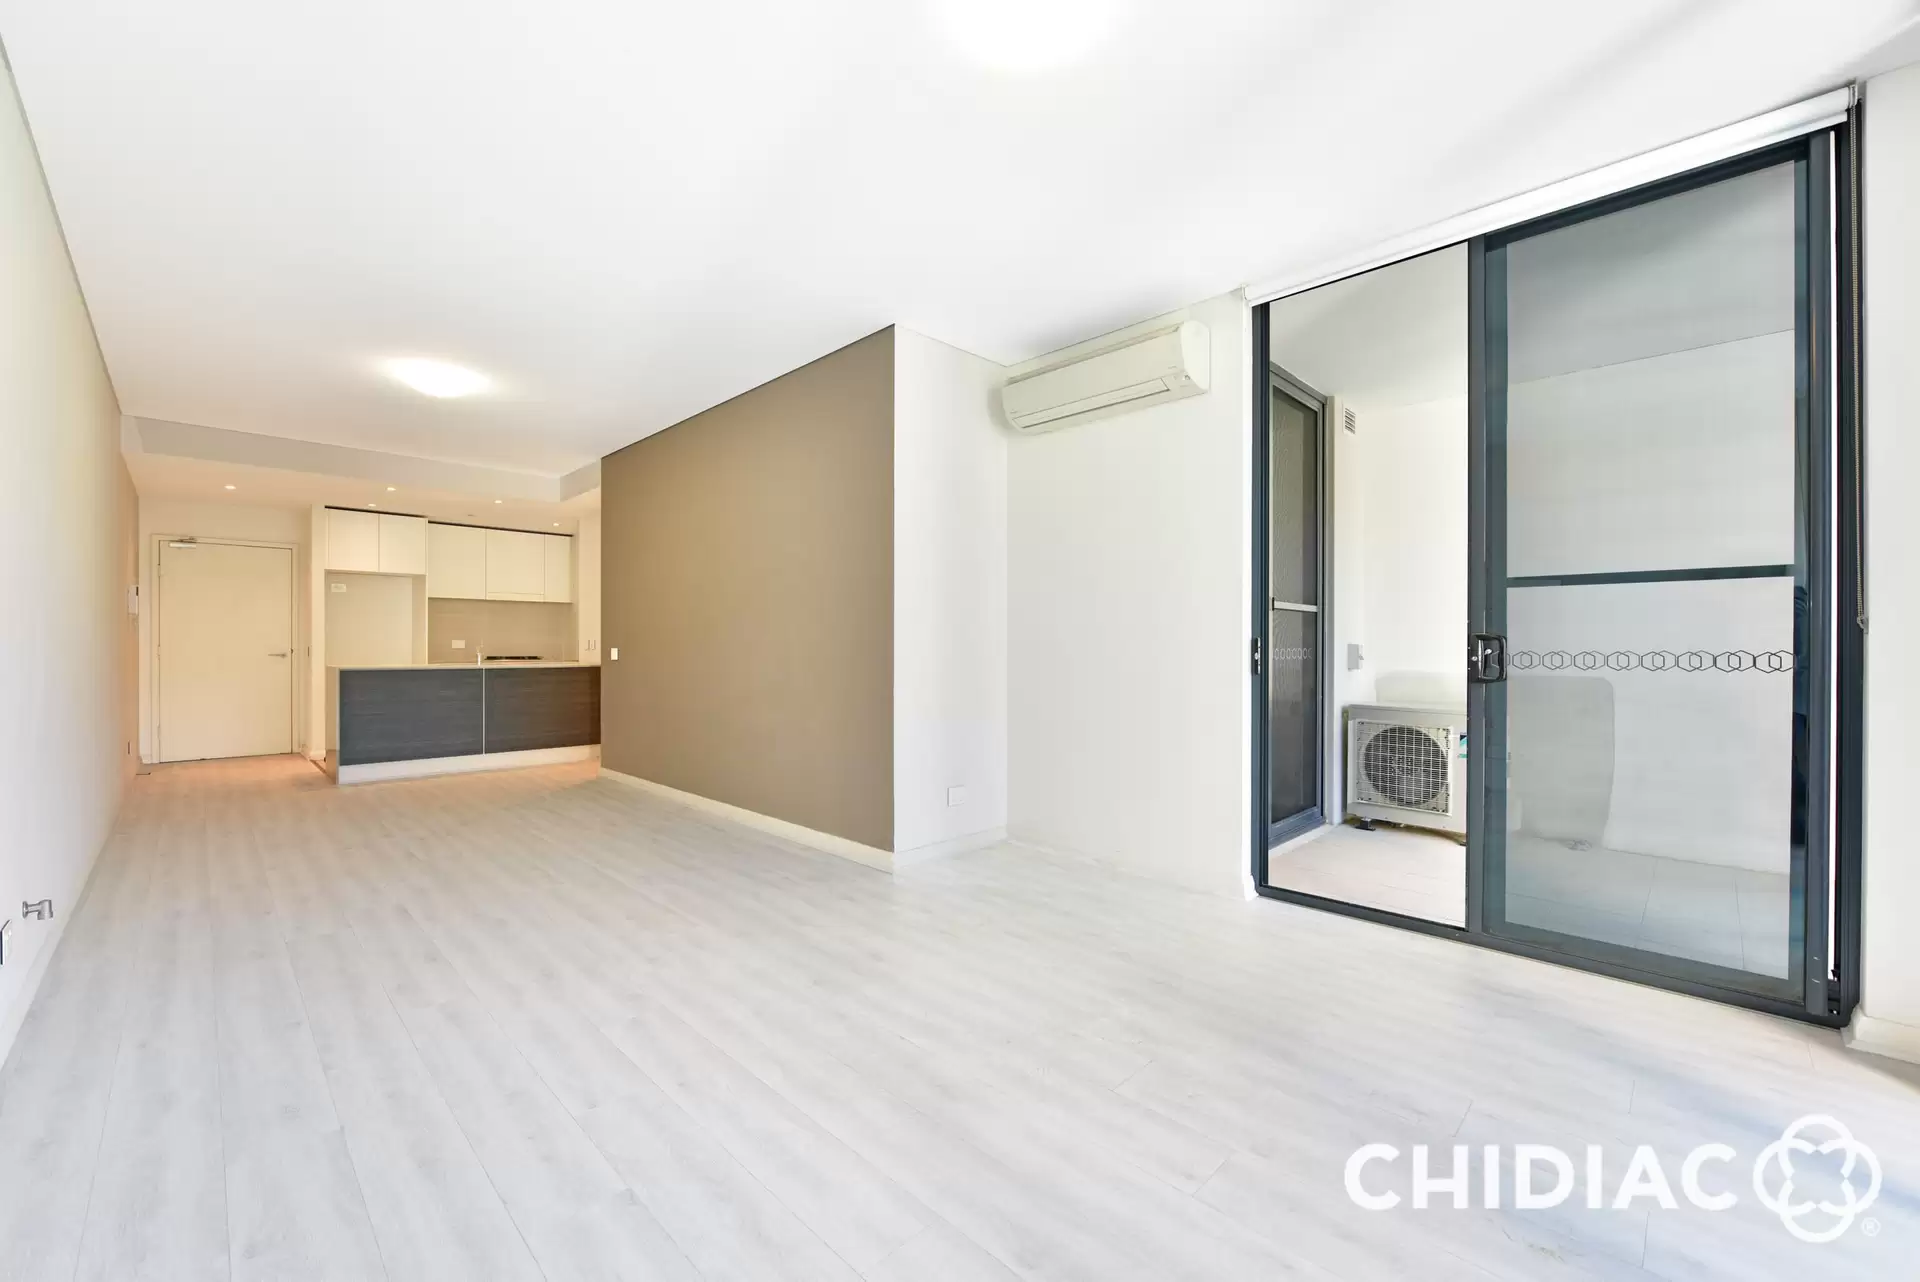 304/46 Amalfi Drive, Wentworth Point Leased by Chidiac Realty - image 1